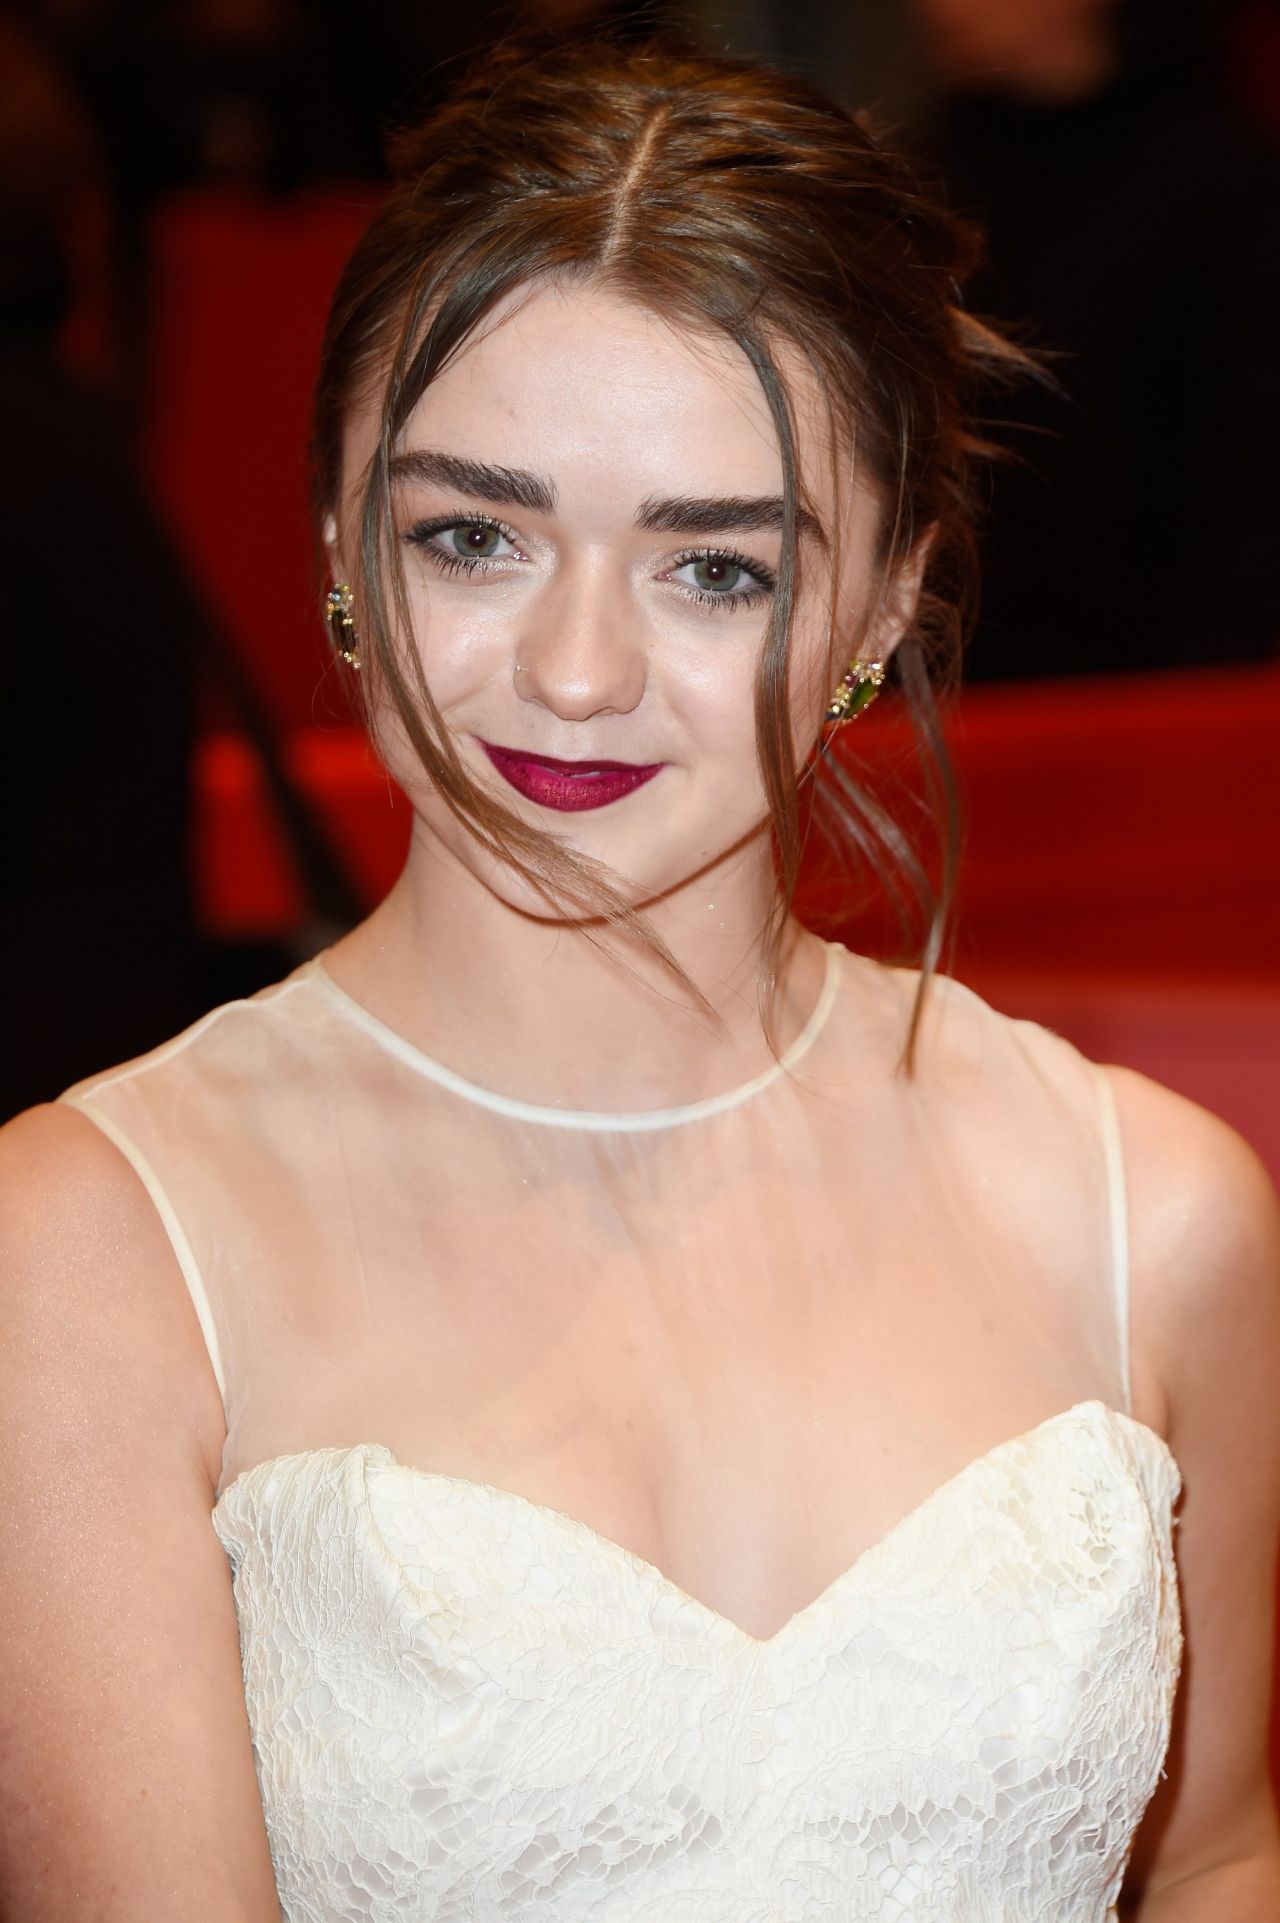 Maisie Williams - 'As We Were Dreaming' Premiere at Berlinale Film Festival1280 x 1923